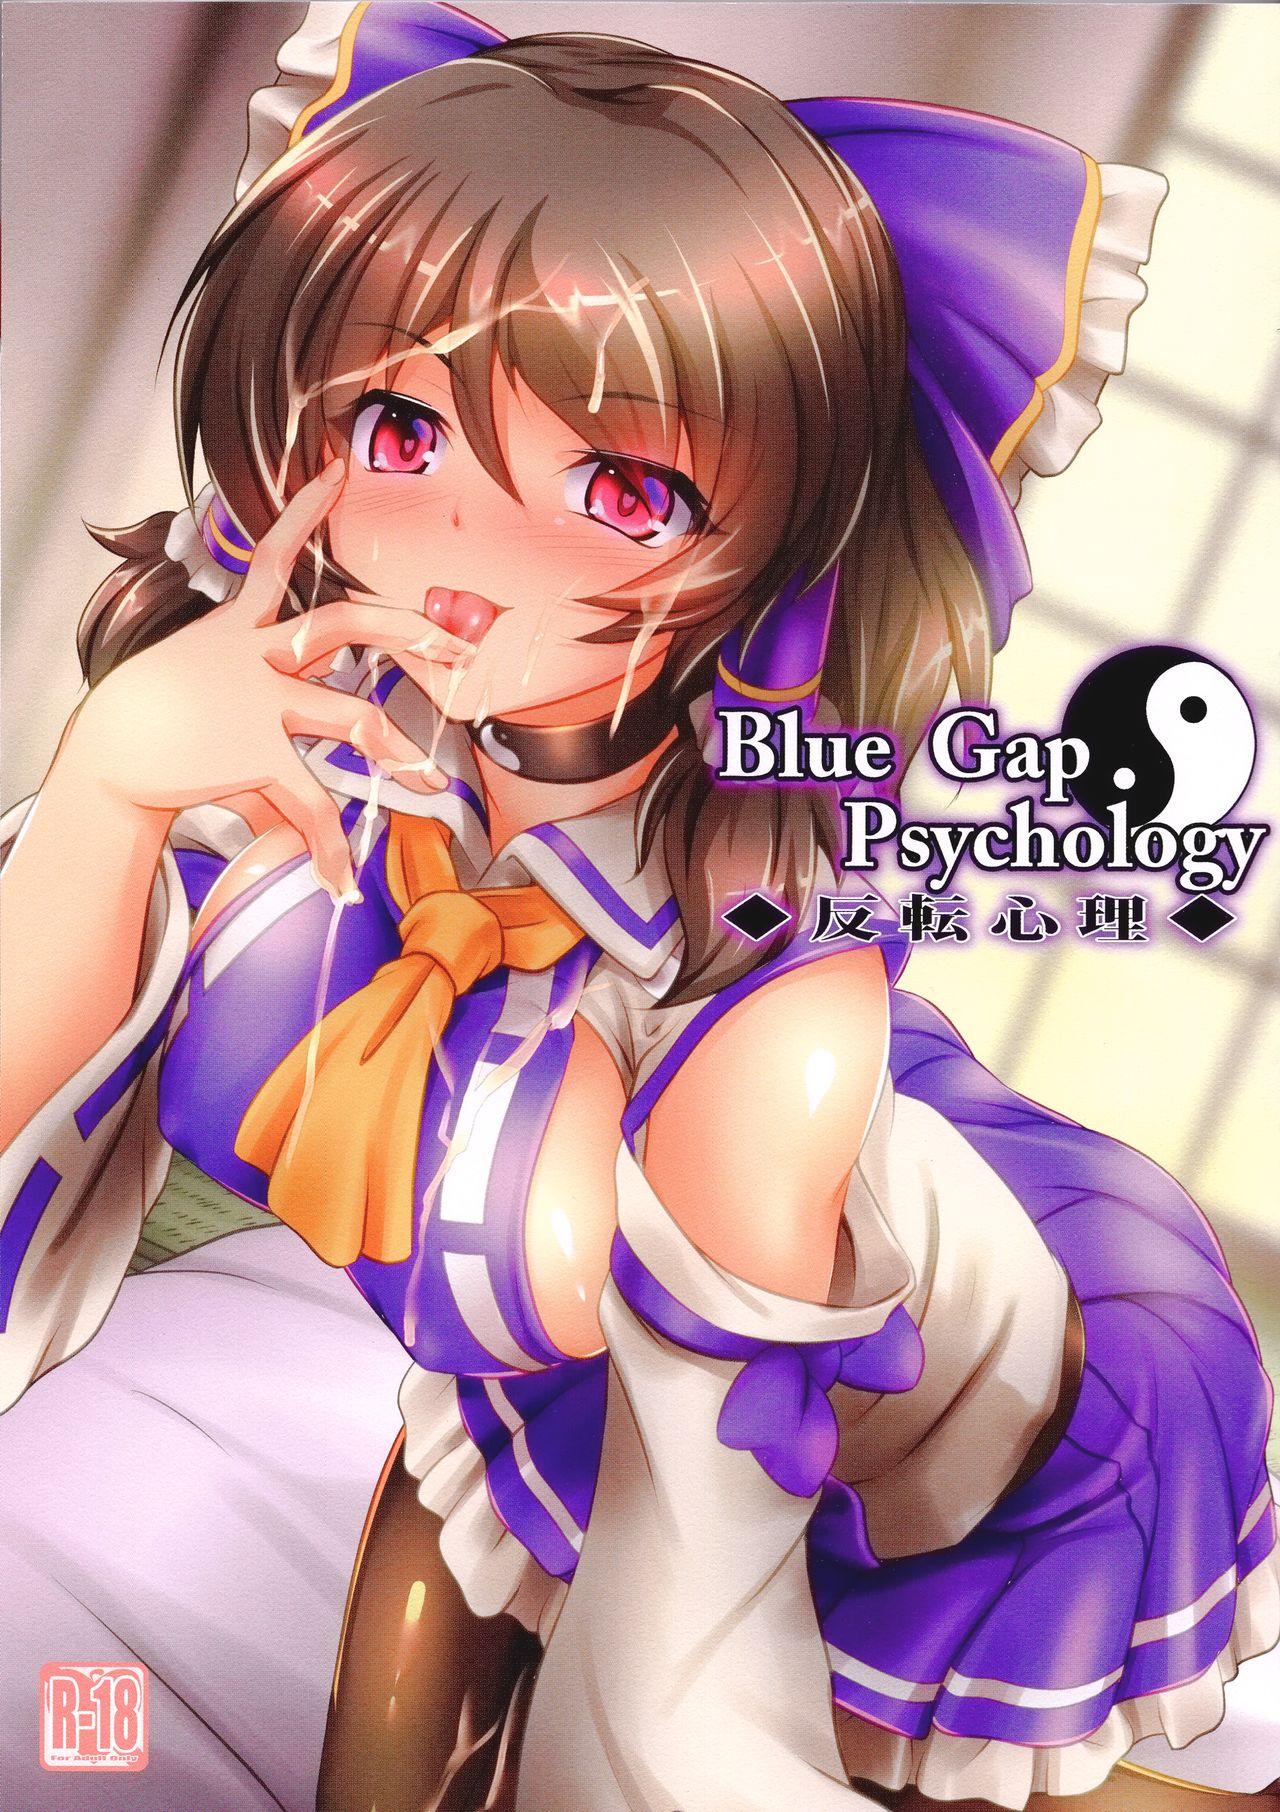 Bisex Blue Gap Psychology - Touhou project Rica - Page 2